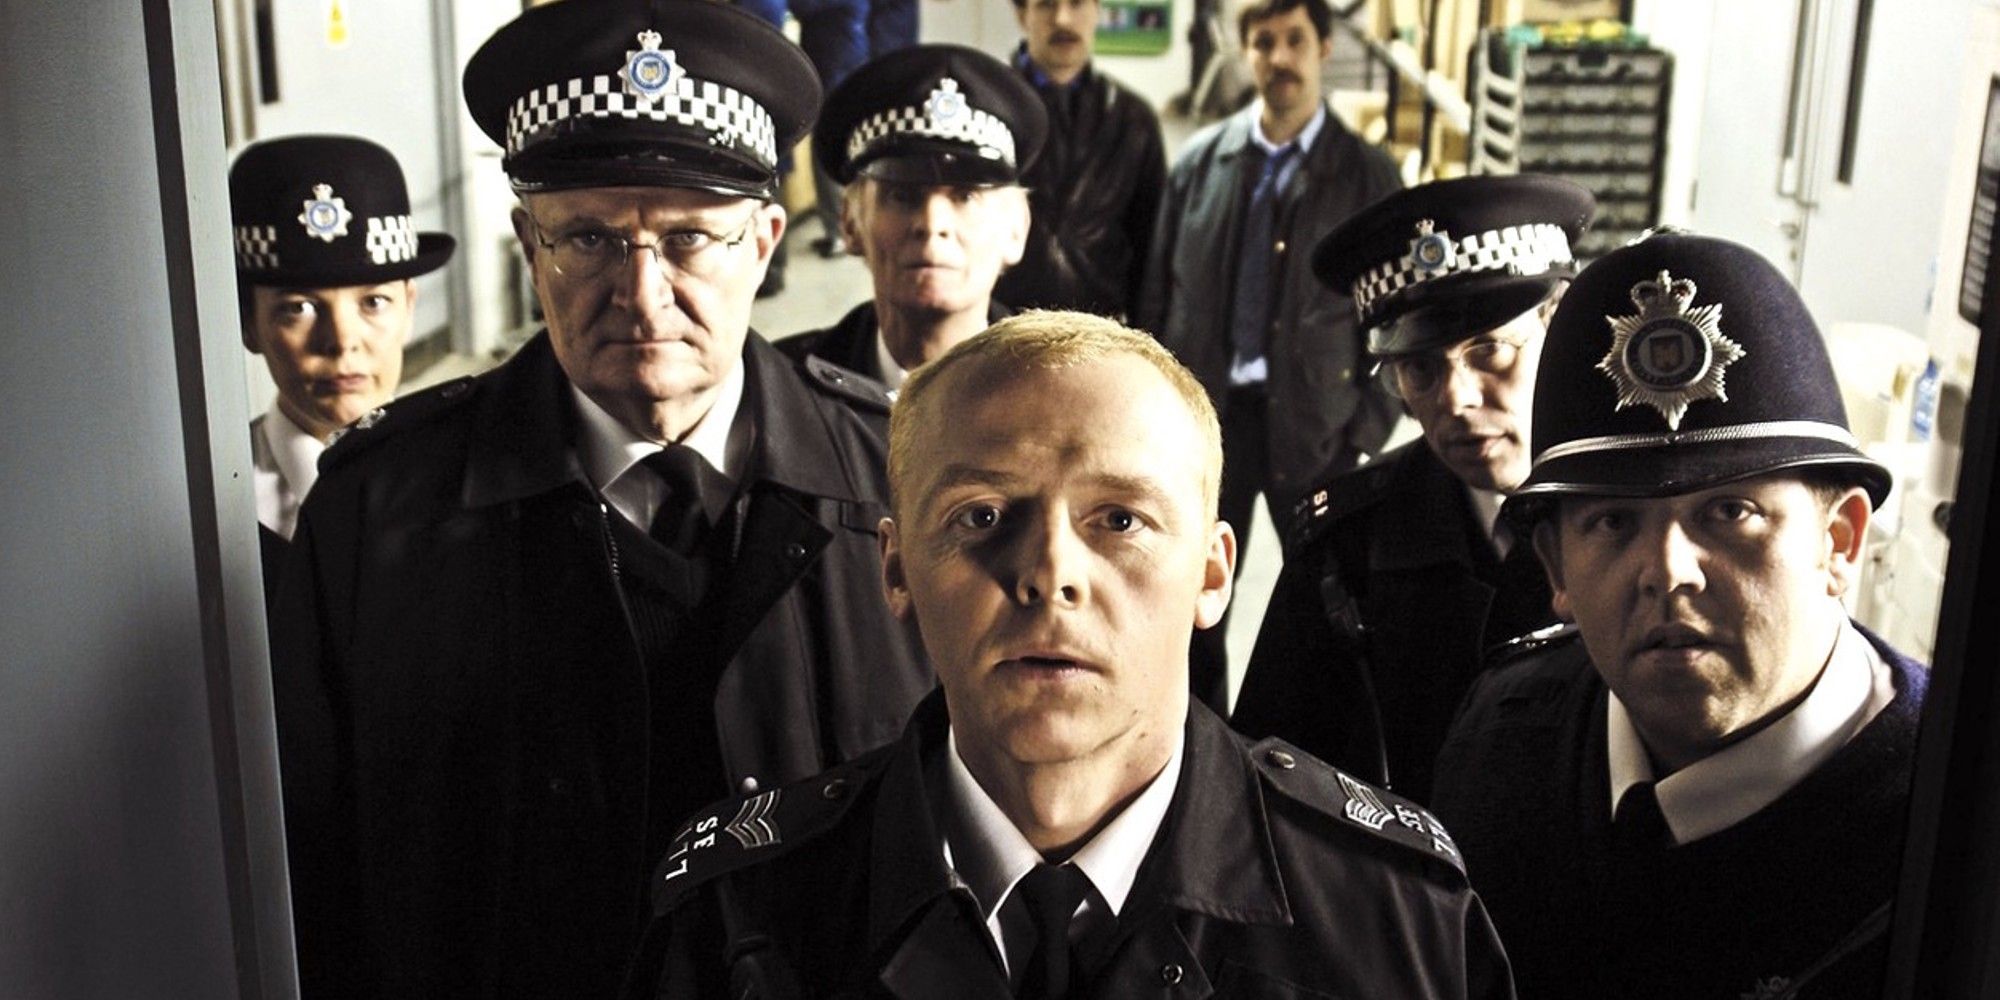 Simon Pegg as Nicholas Angel, Nick Frost as Danny Butterman, Jim Broadbent as Frank Butterman and Olivia Colman as Doris Thatcher in Hot Fuzz